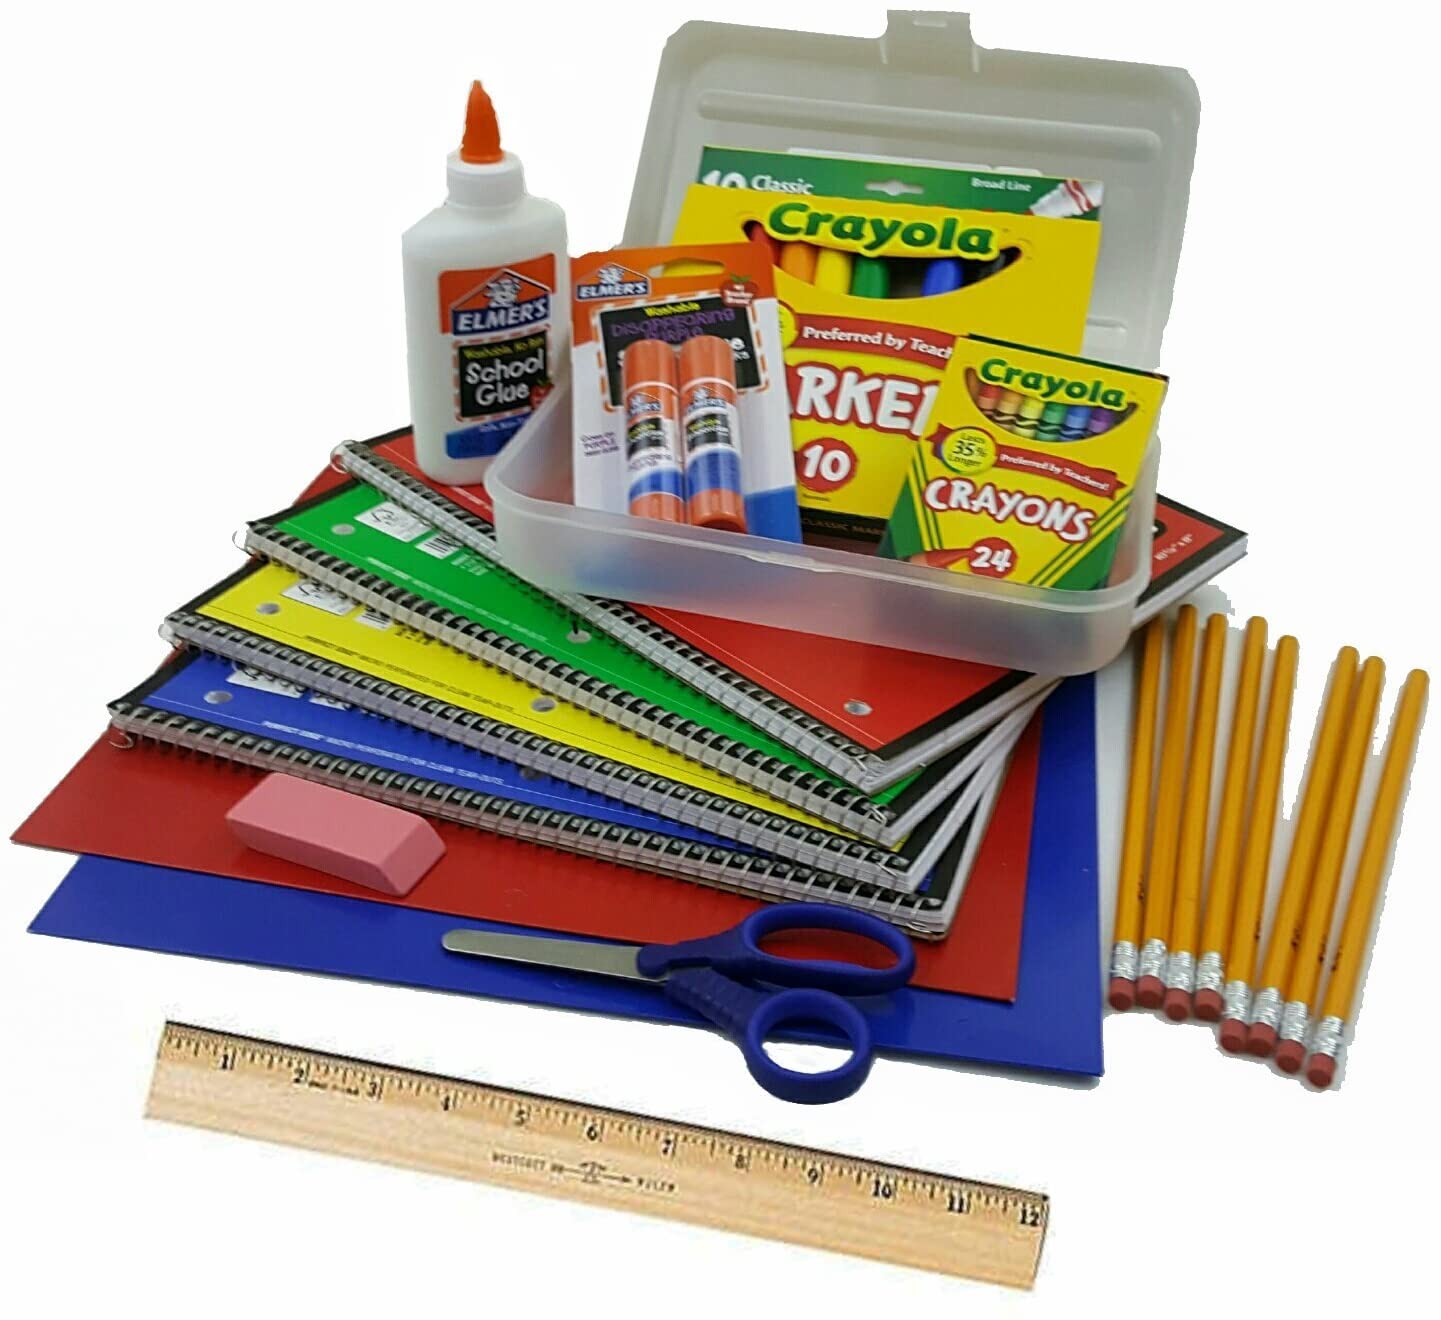 Old Mill School - MRS. DIMICCO'S CLASS 2023-24 School Supply Package